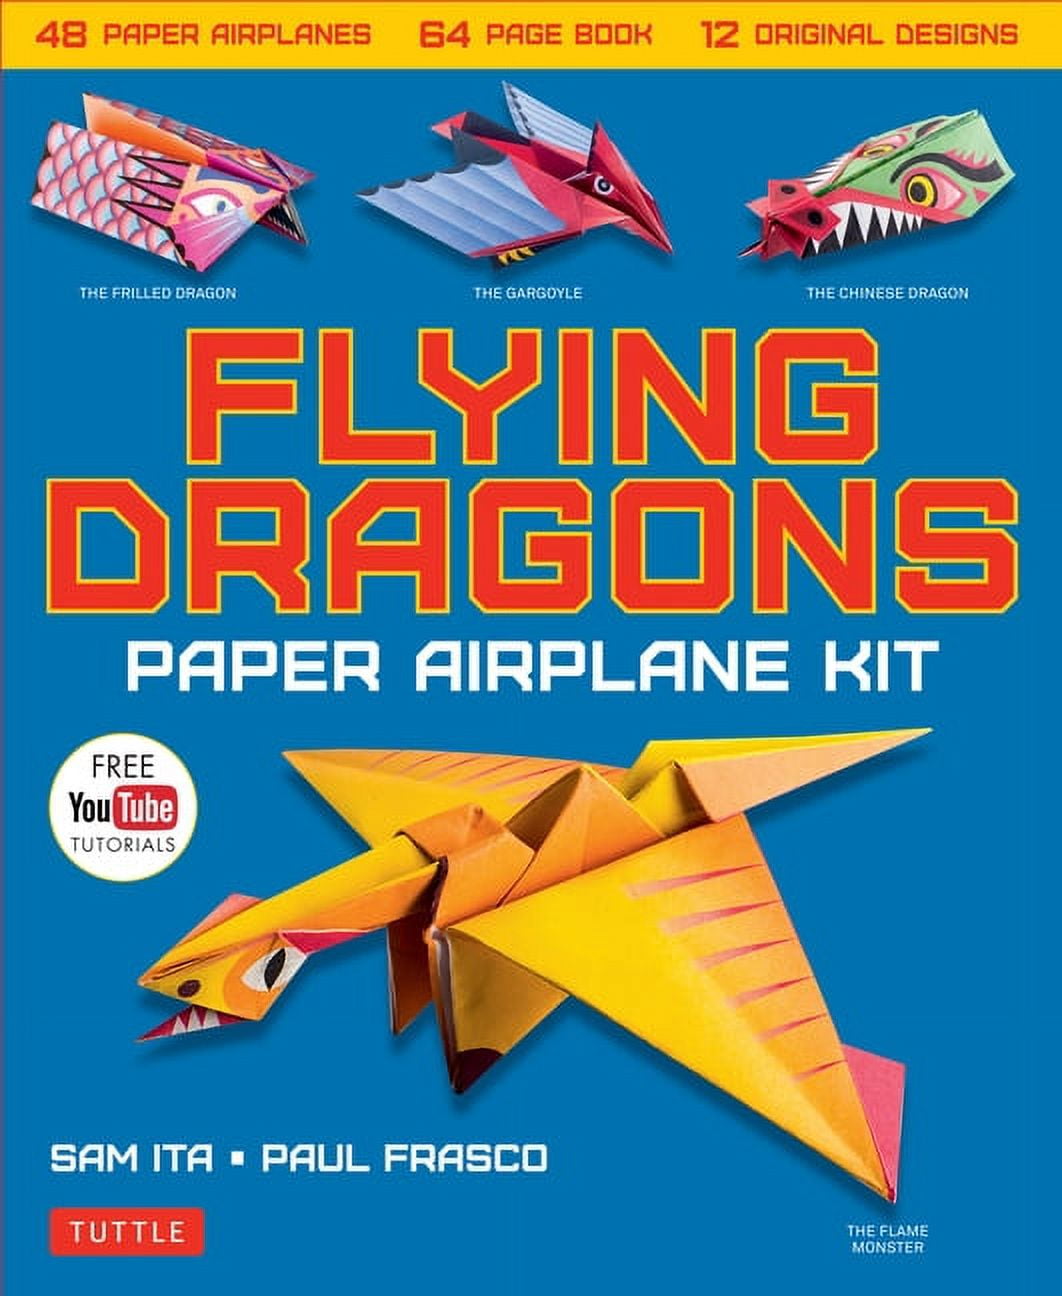 Activity Kits, Paper airplanes, Activity Games & Sports-Related Games